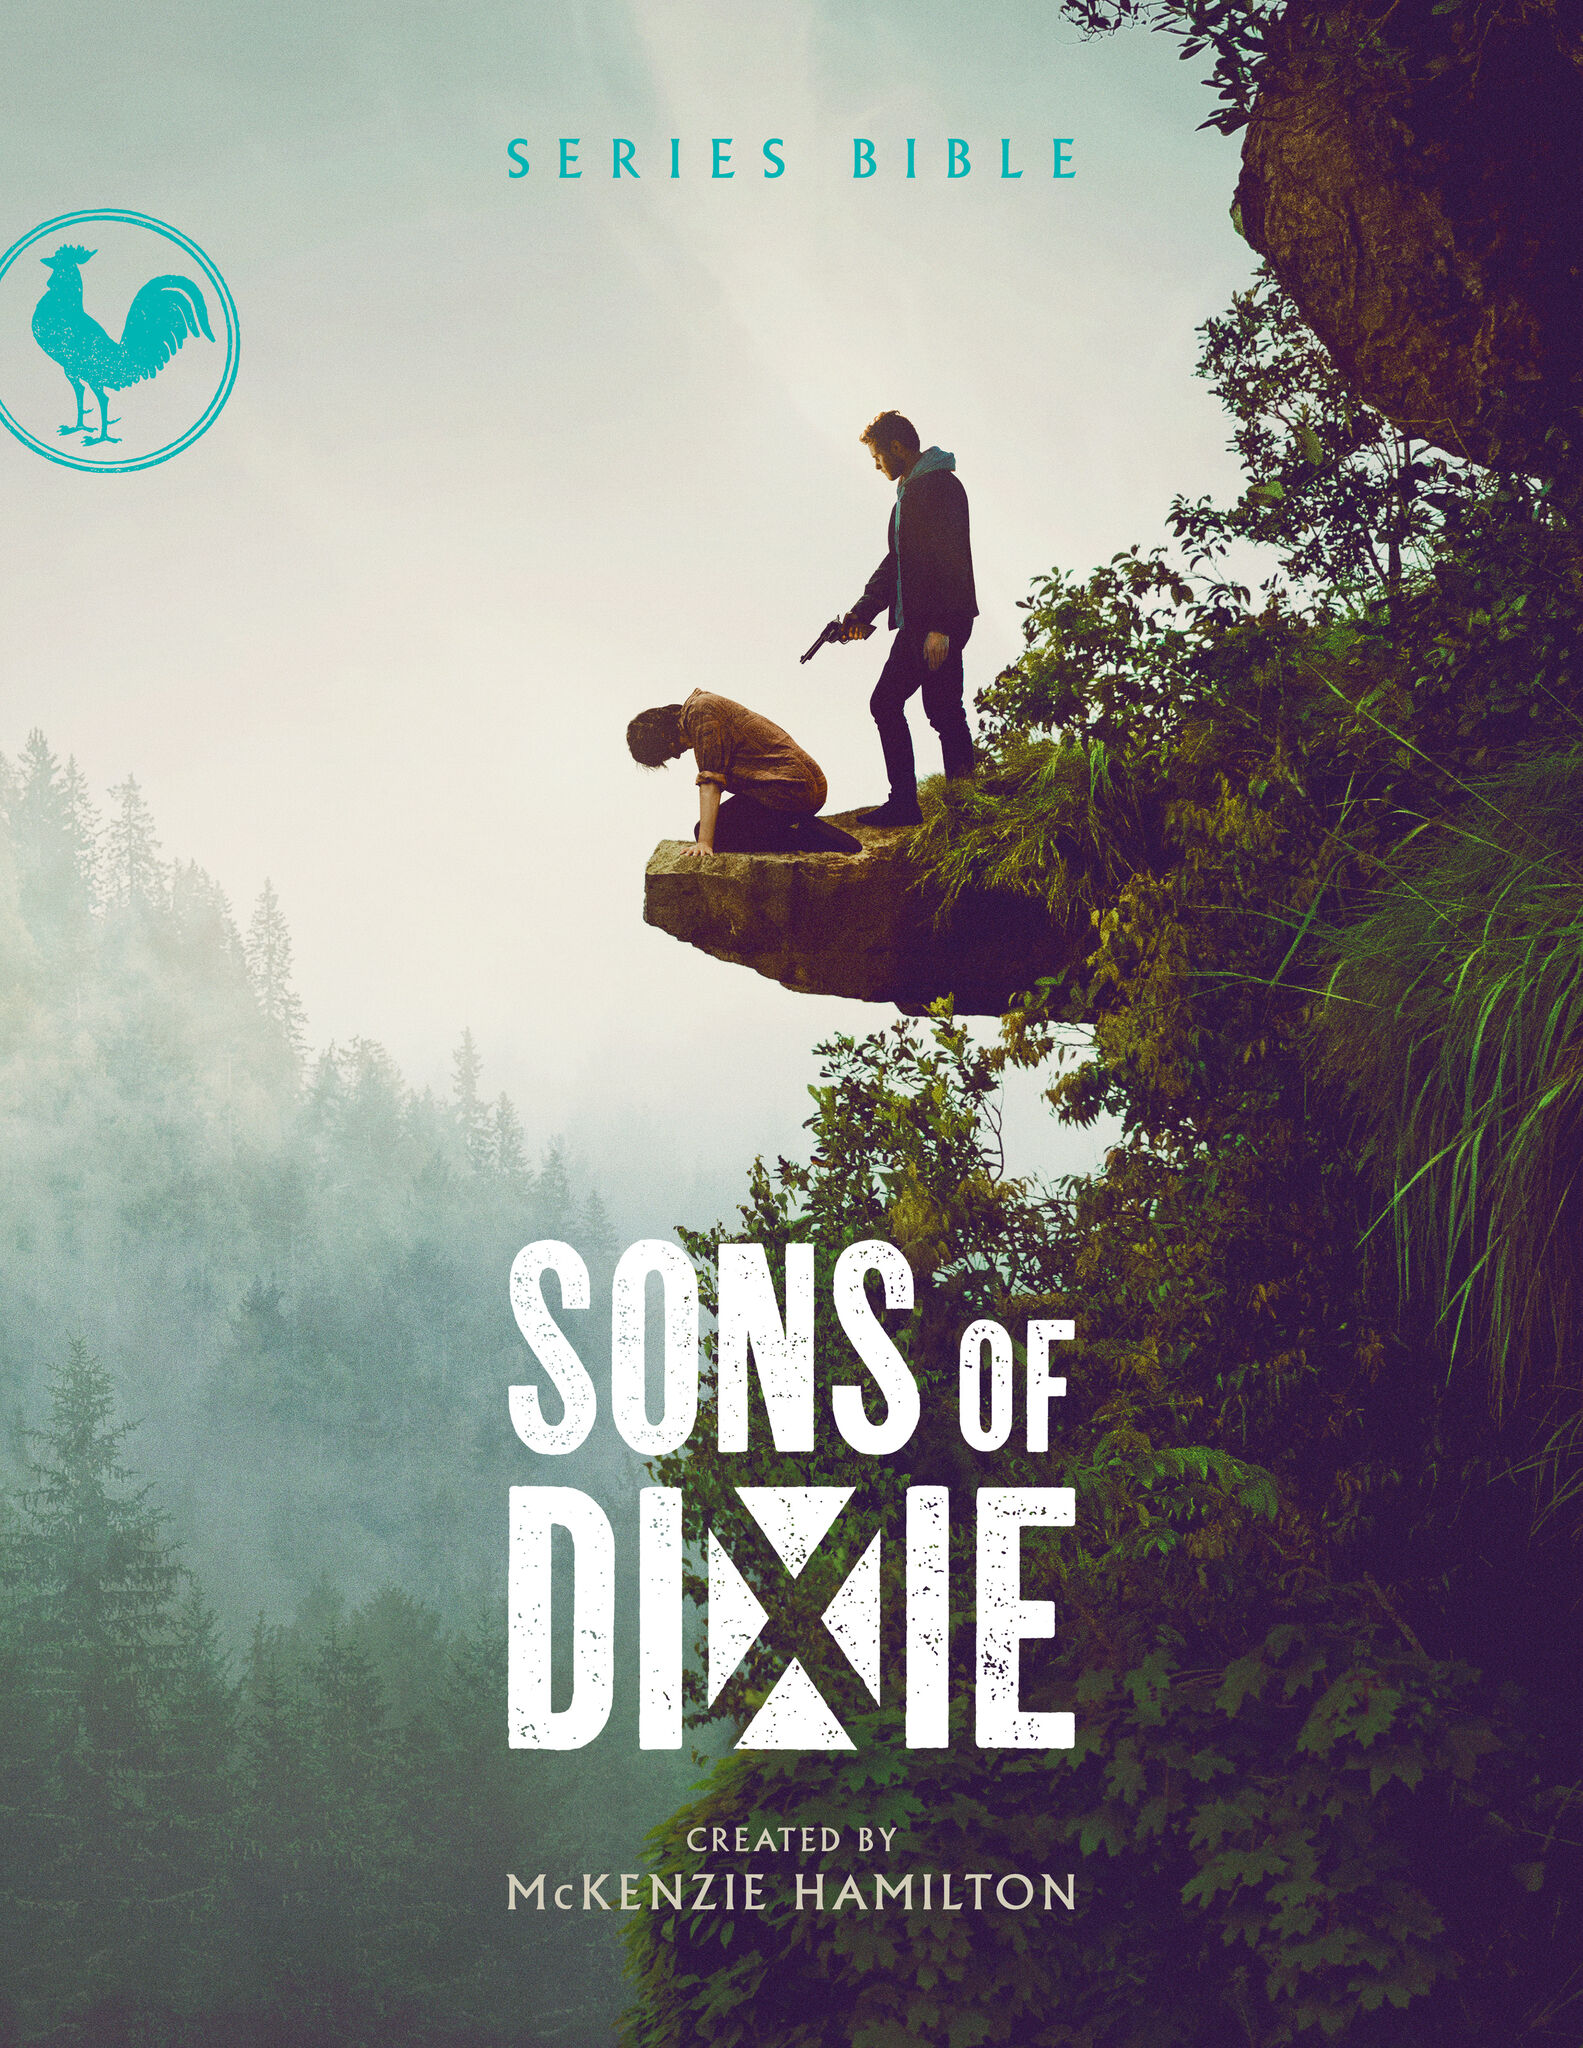 SONS OF DIXIE